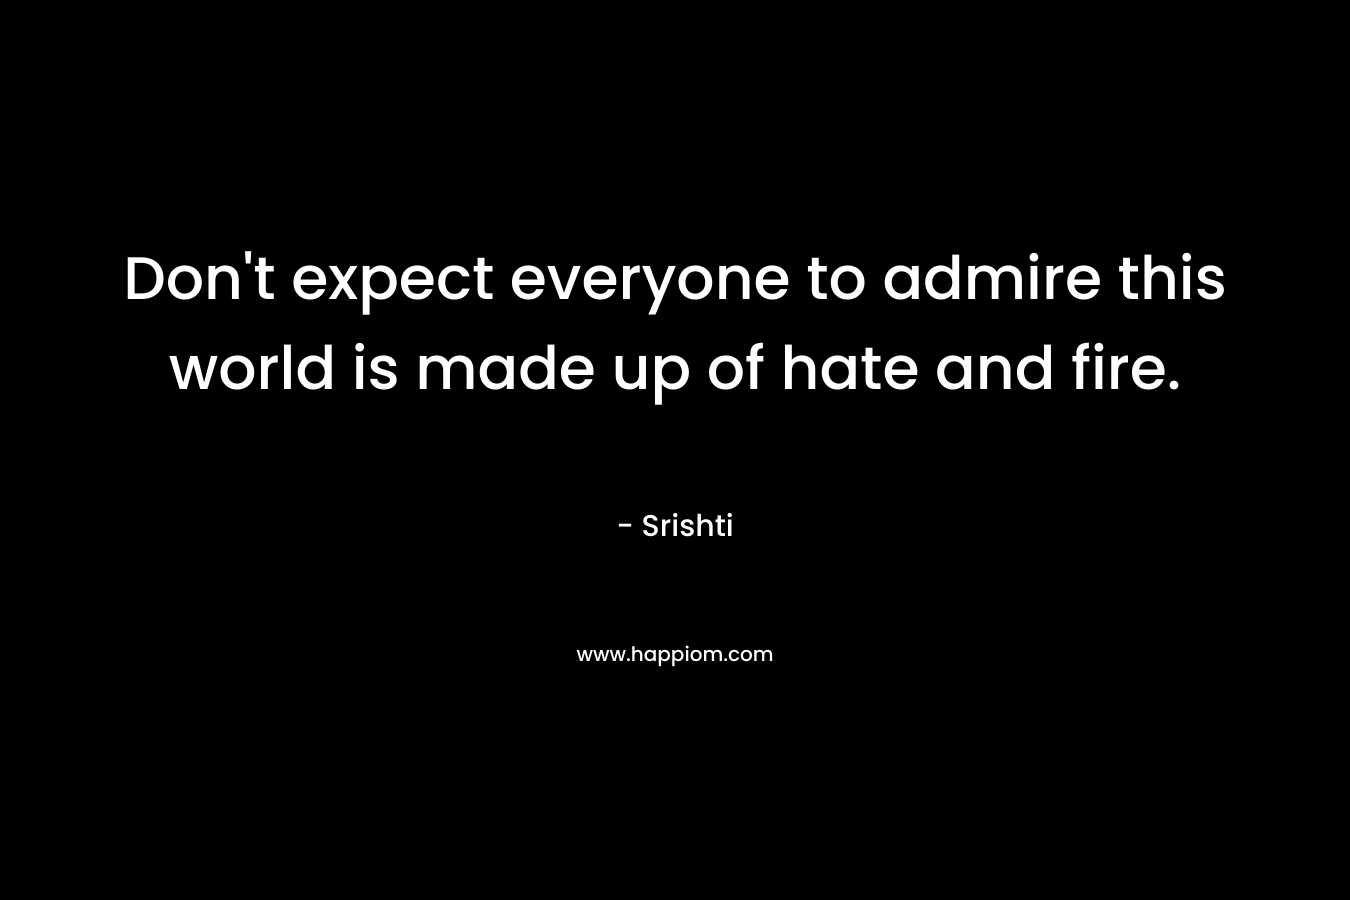 Don't expect everyone to admire this world is made up of hate and fire.